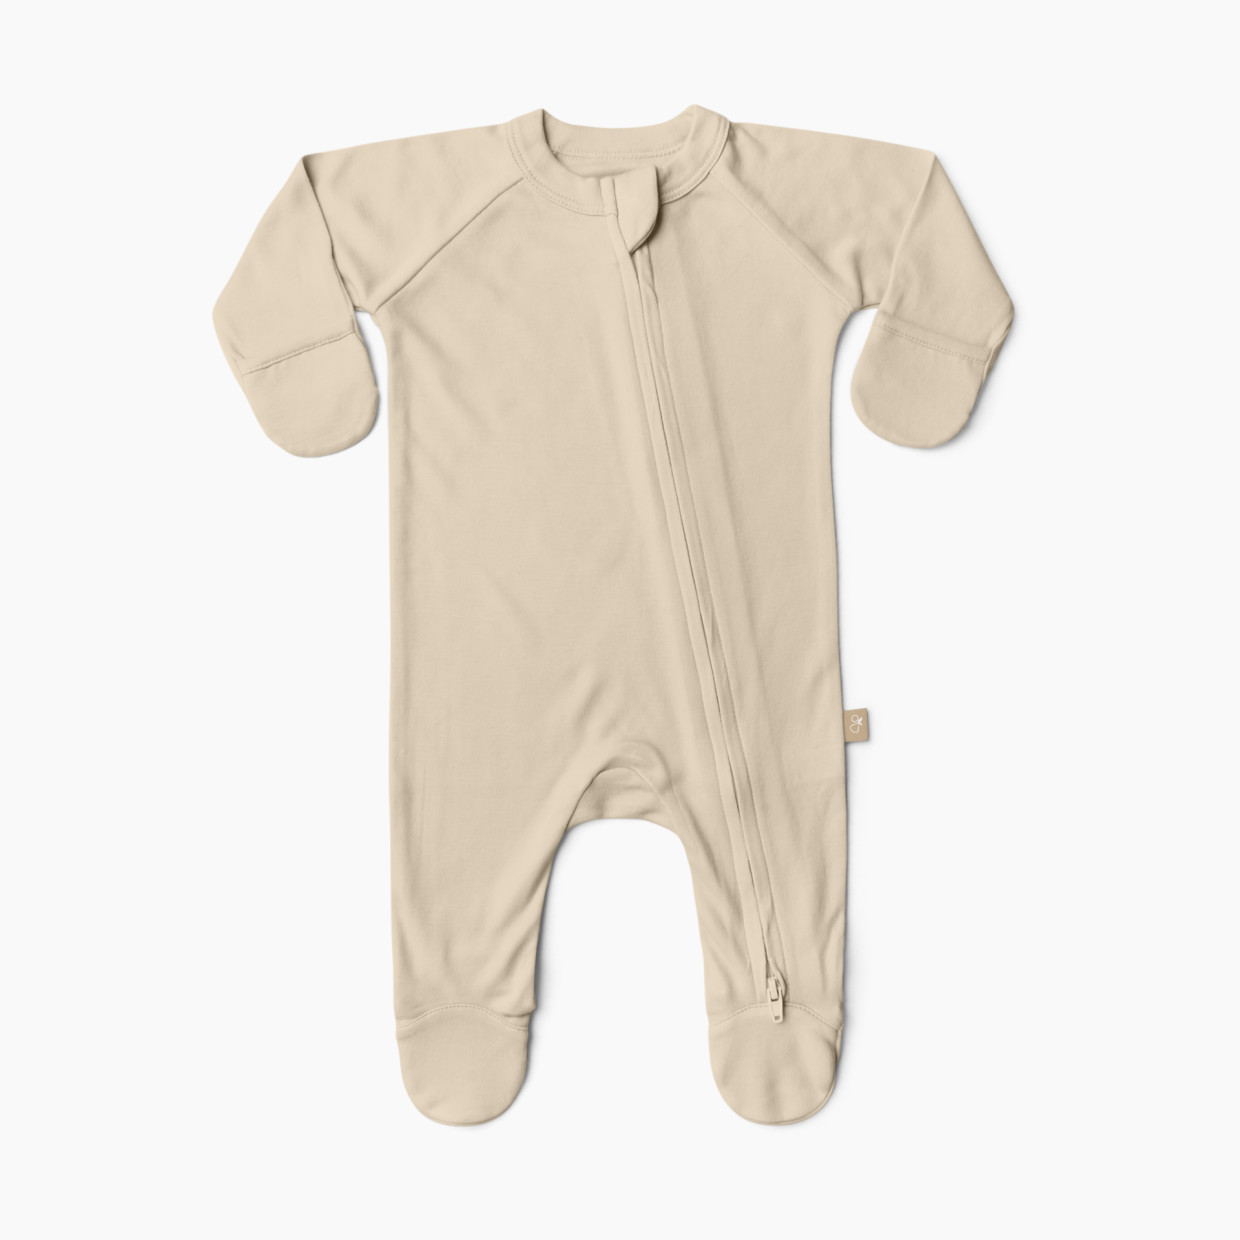 Goumi Kids x Babylist Grow With You Footie - Loose Fit - Oat, 0-3 M.